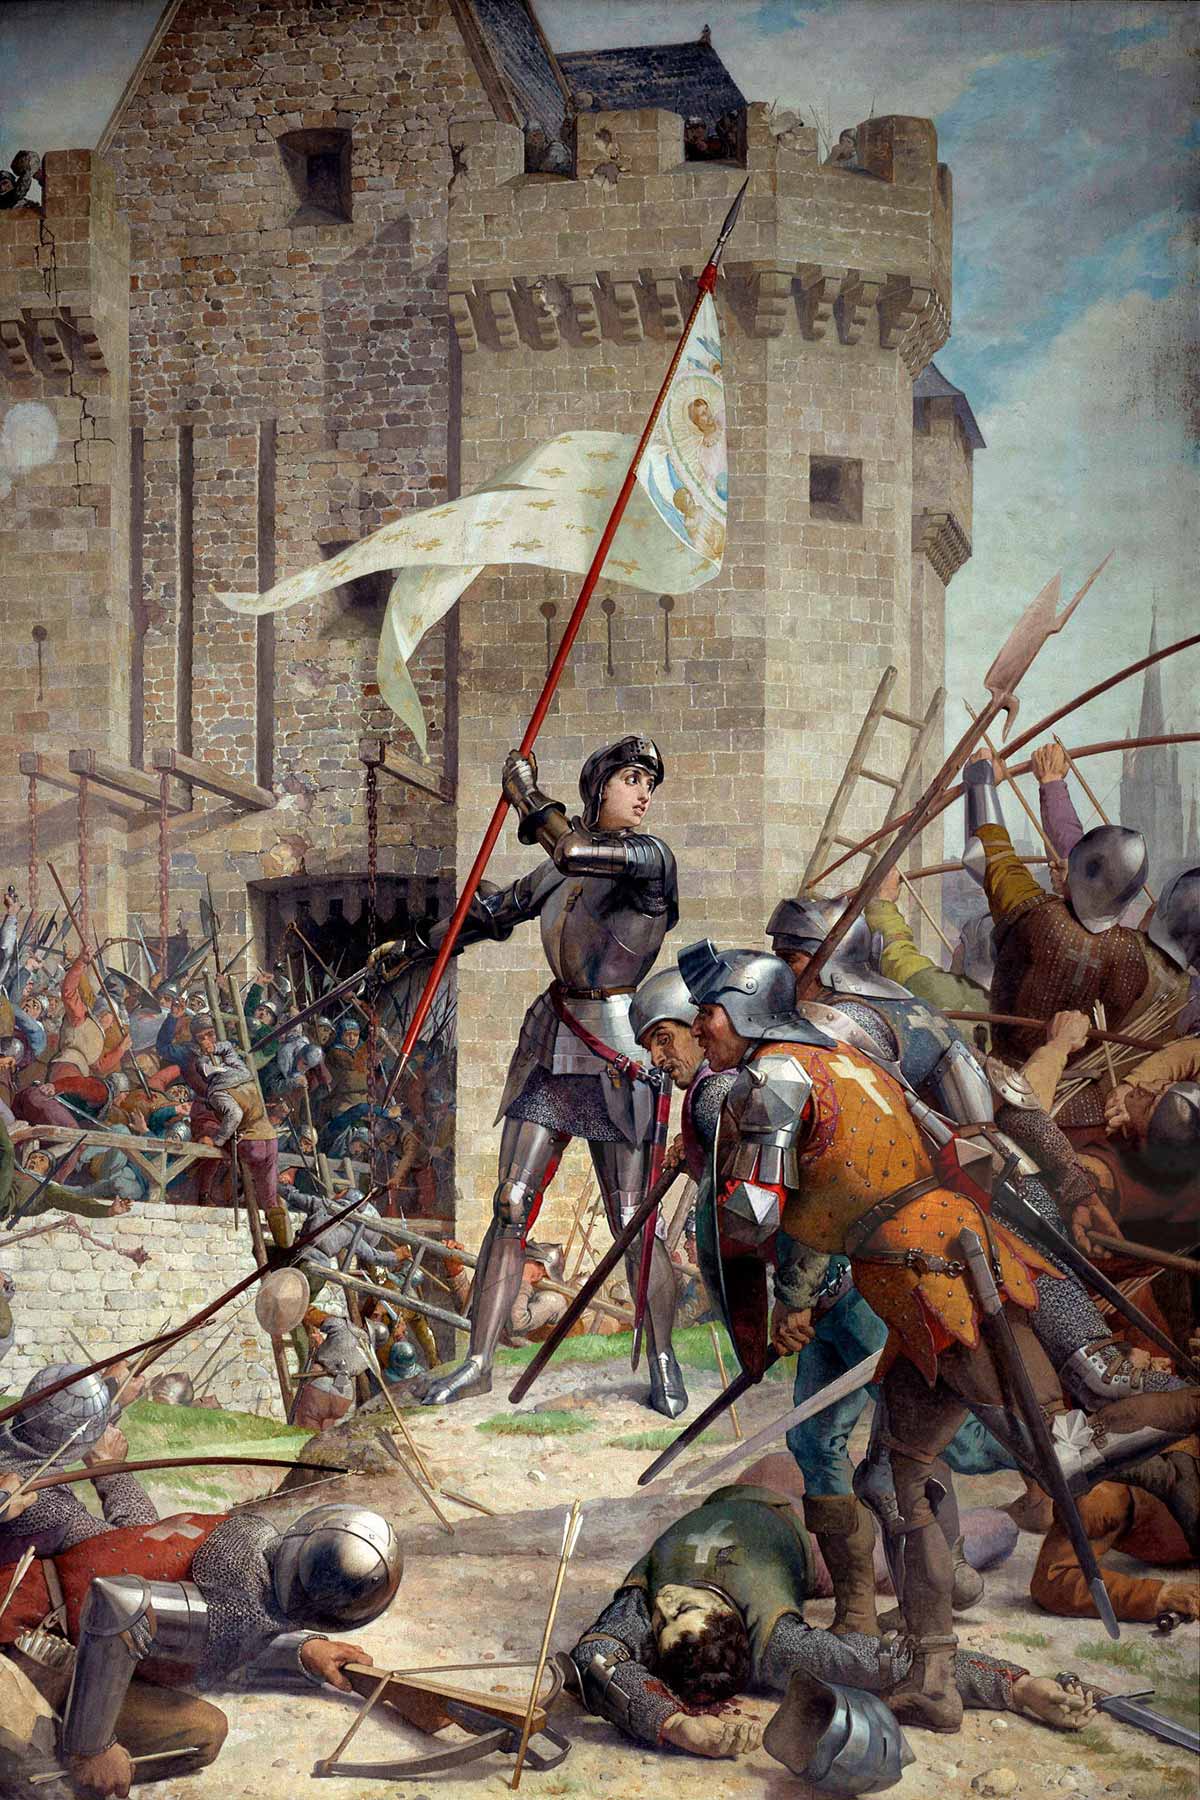 "Joan of Arc at the Siege of Orléans" (1890) by Jules Eugène Lenepveu